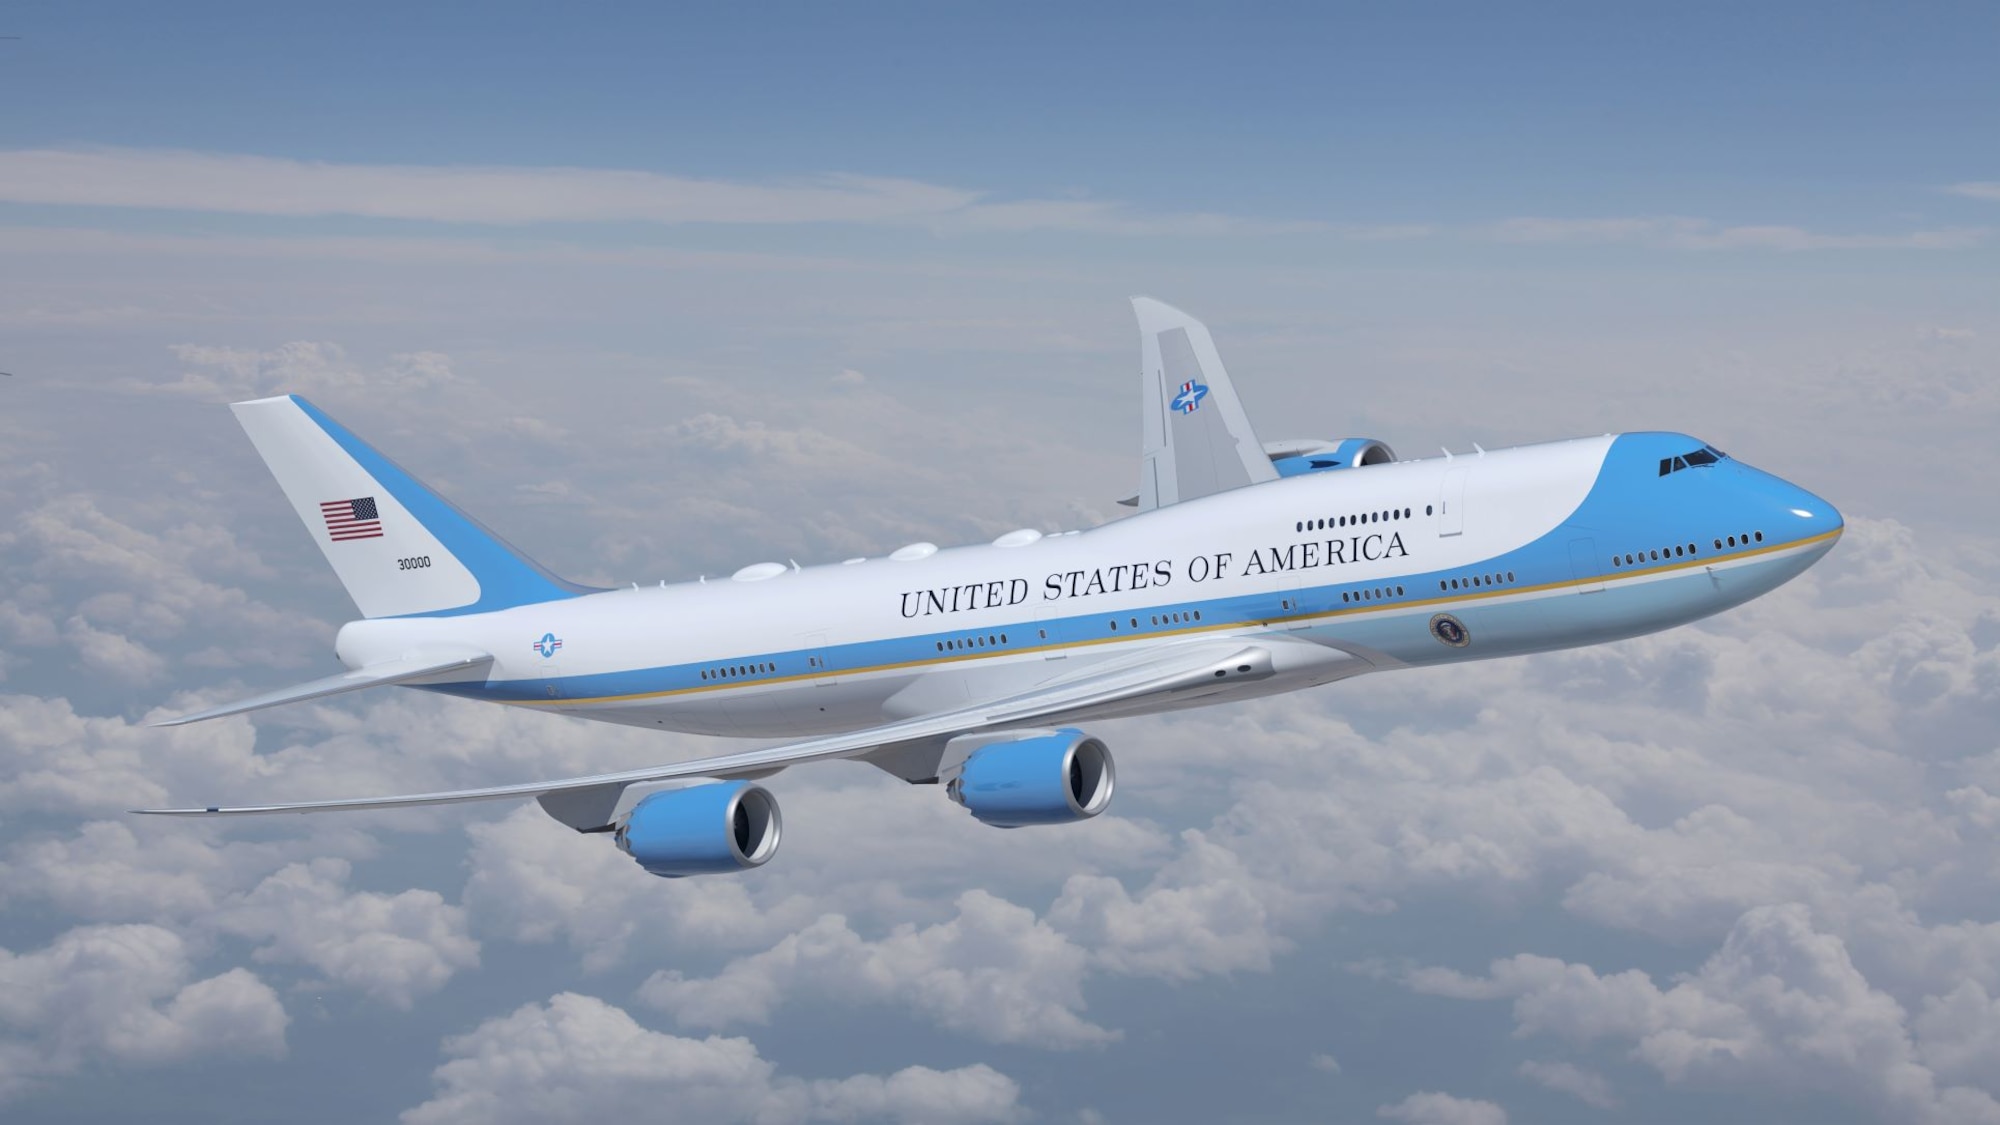 New paint design for 'Next Air Force One' > Air Force > Article